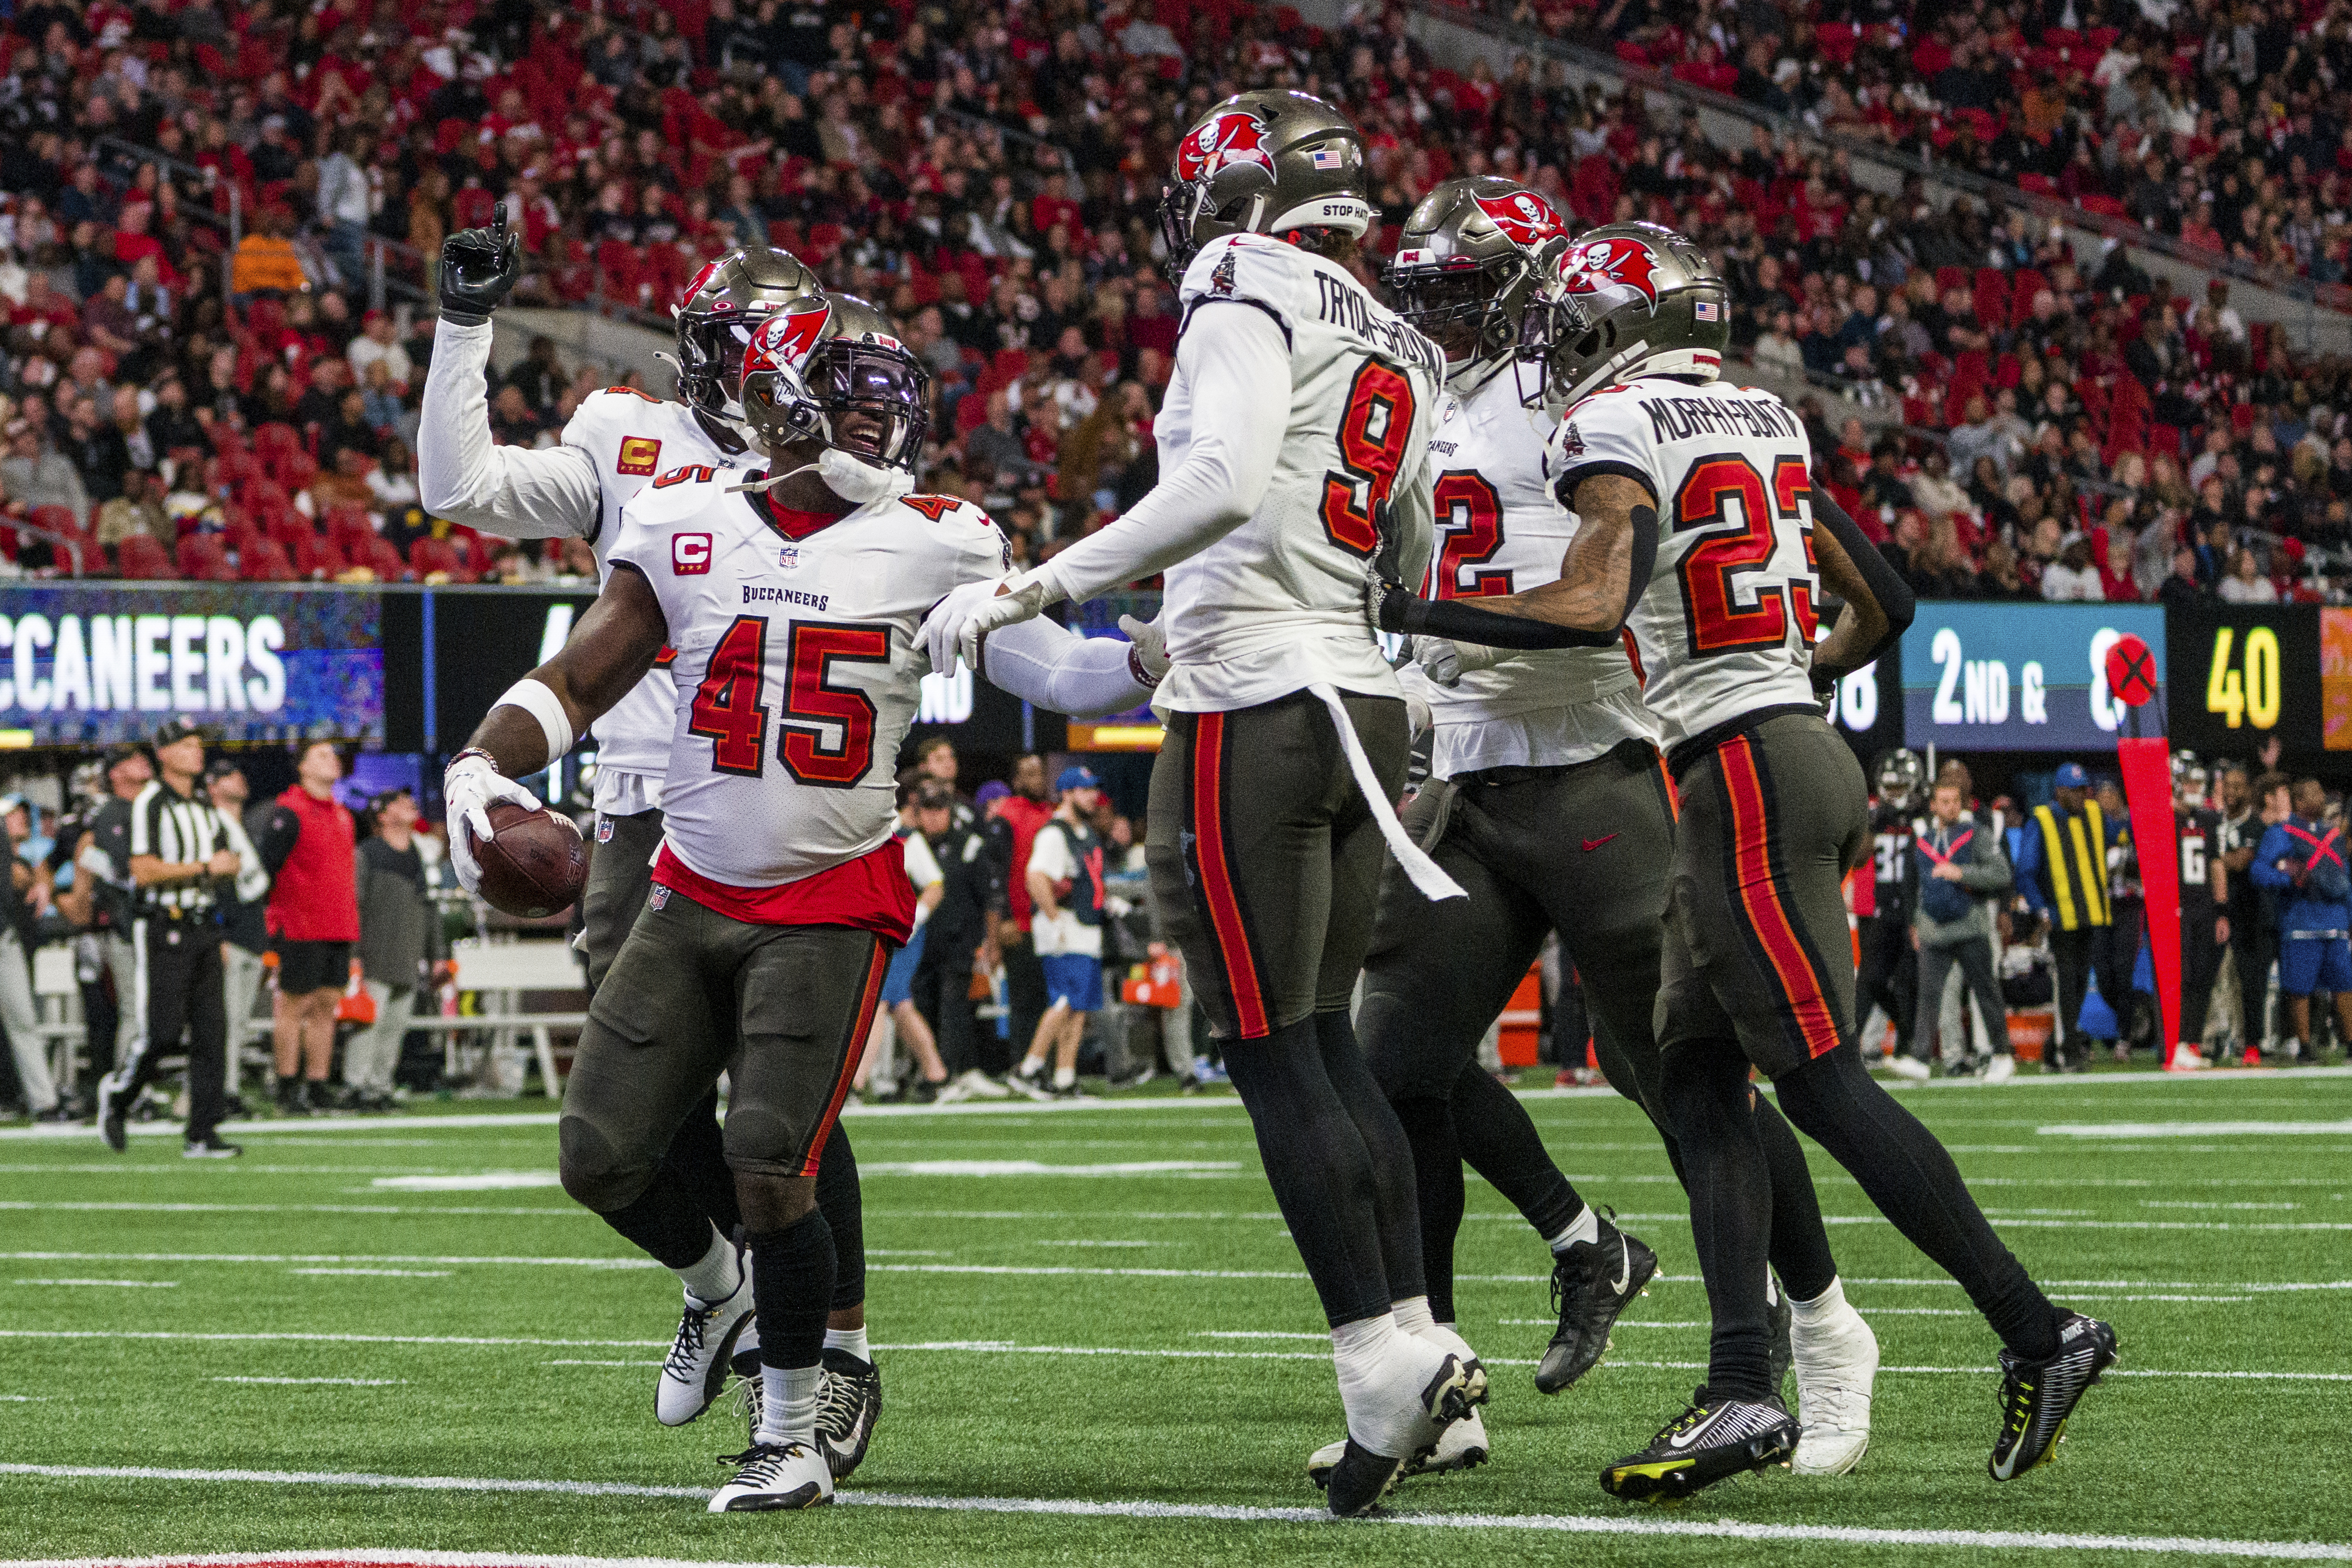 Takeaways from the Bucs Loss Against the 49ers